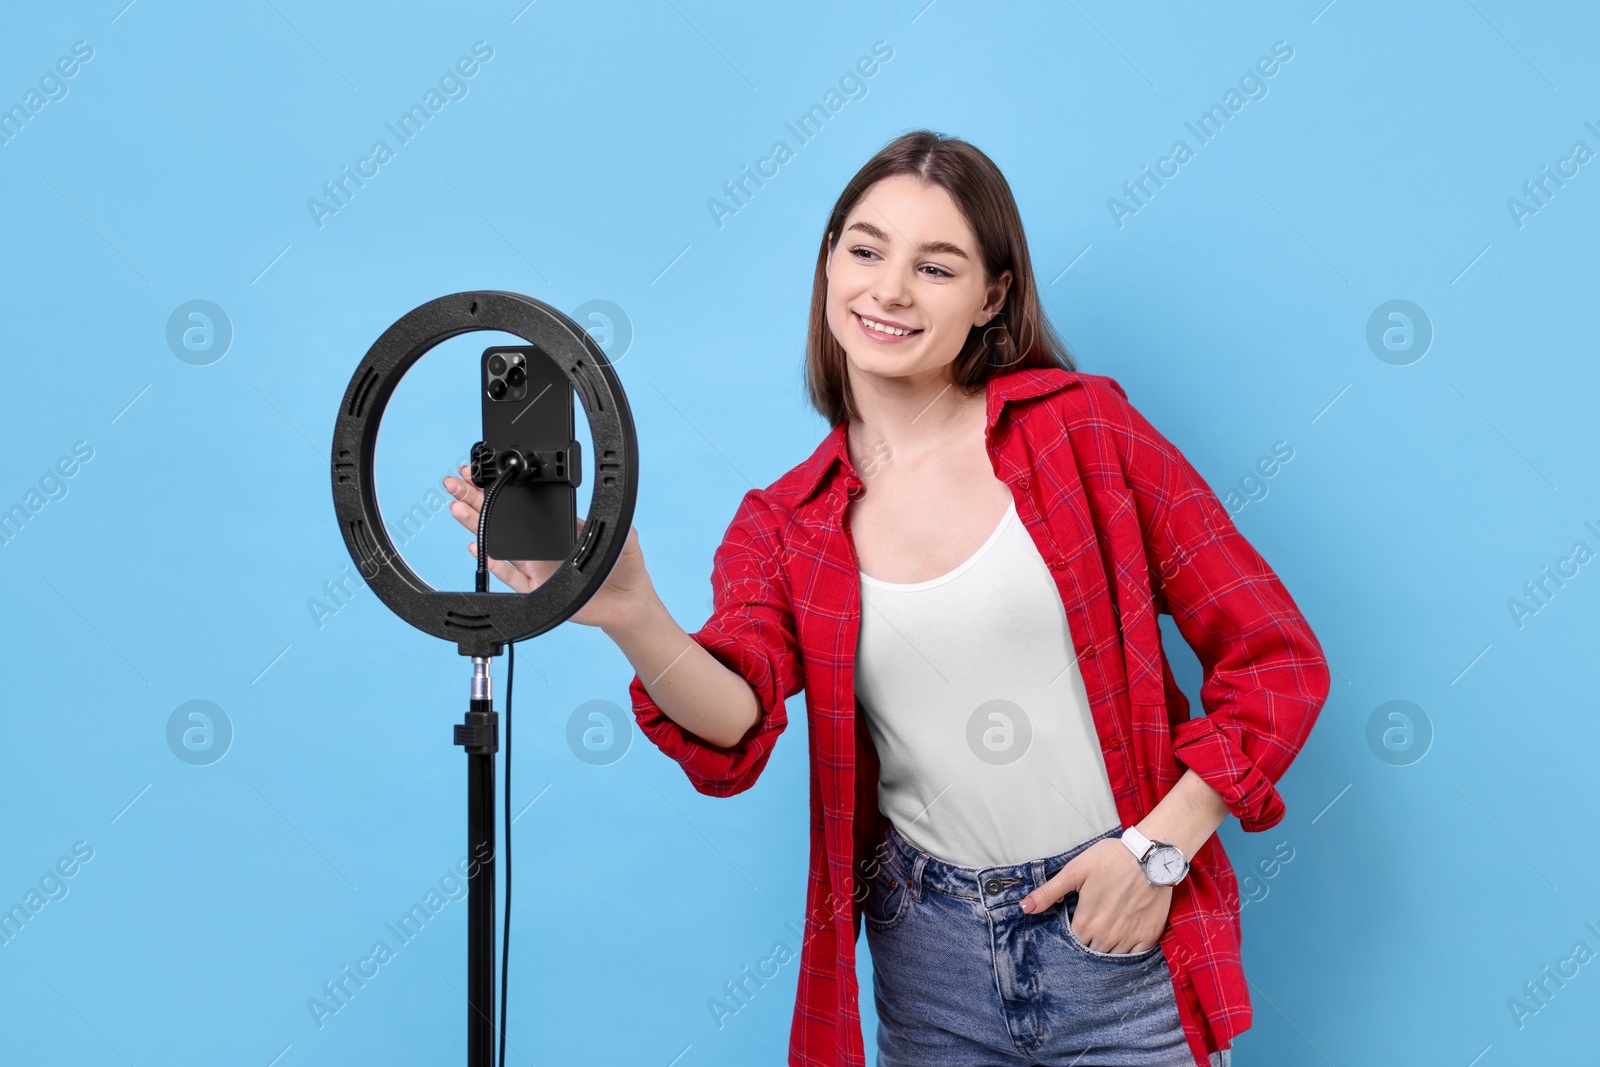 Photo of Blogger recording video with smartphone and ring lamp on light blue background